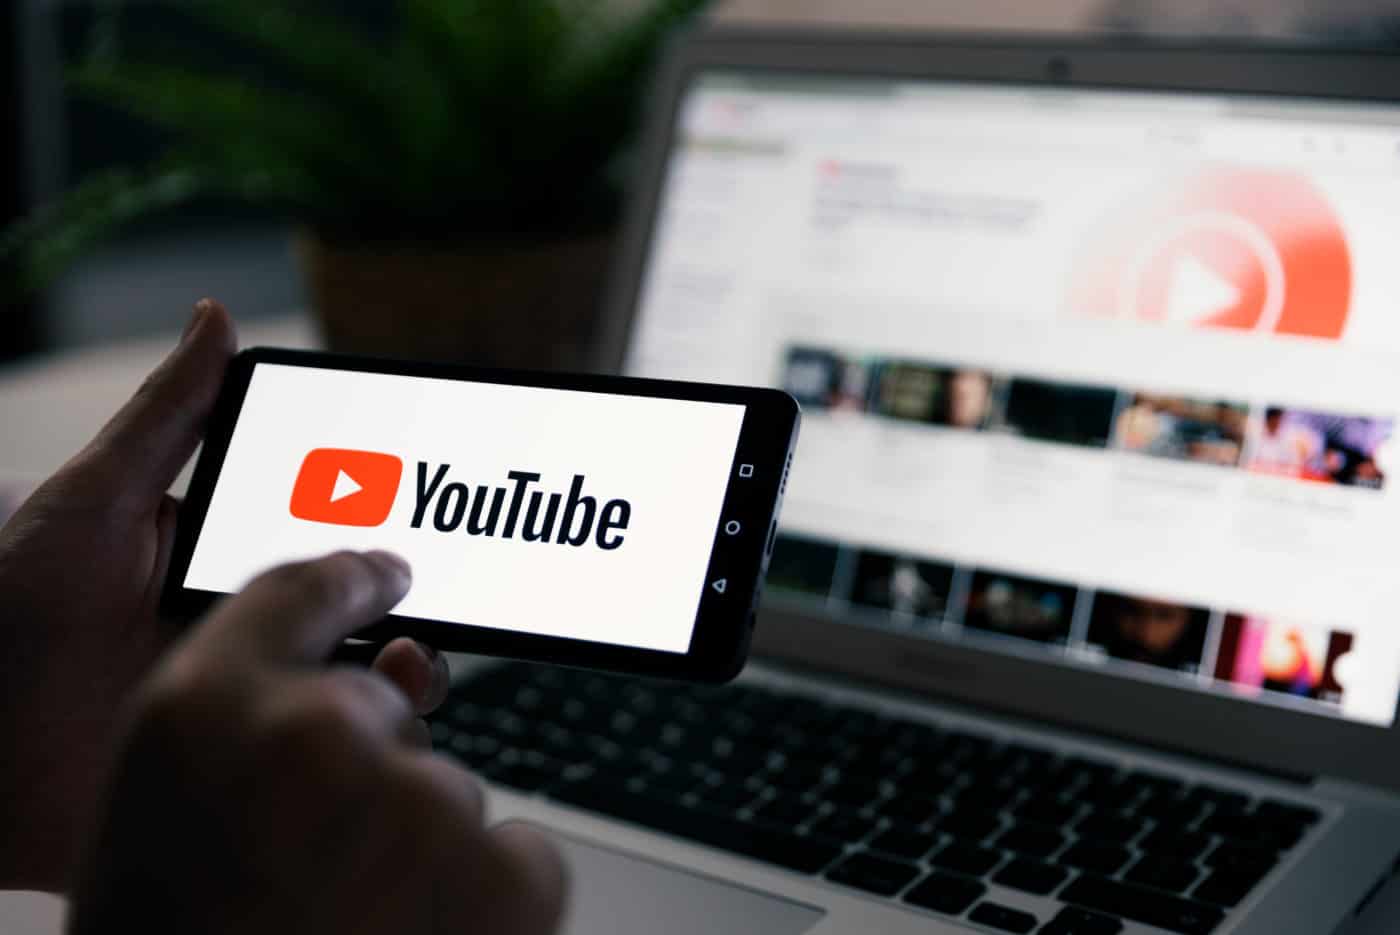 YouTube is popular video service developed by Google